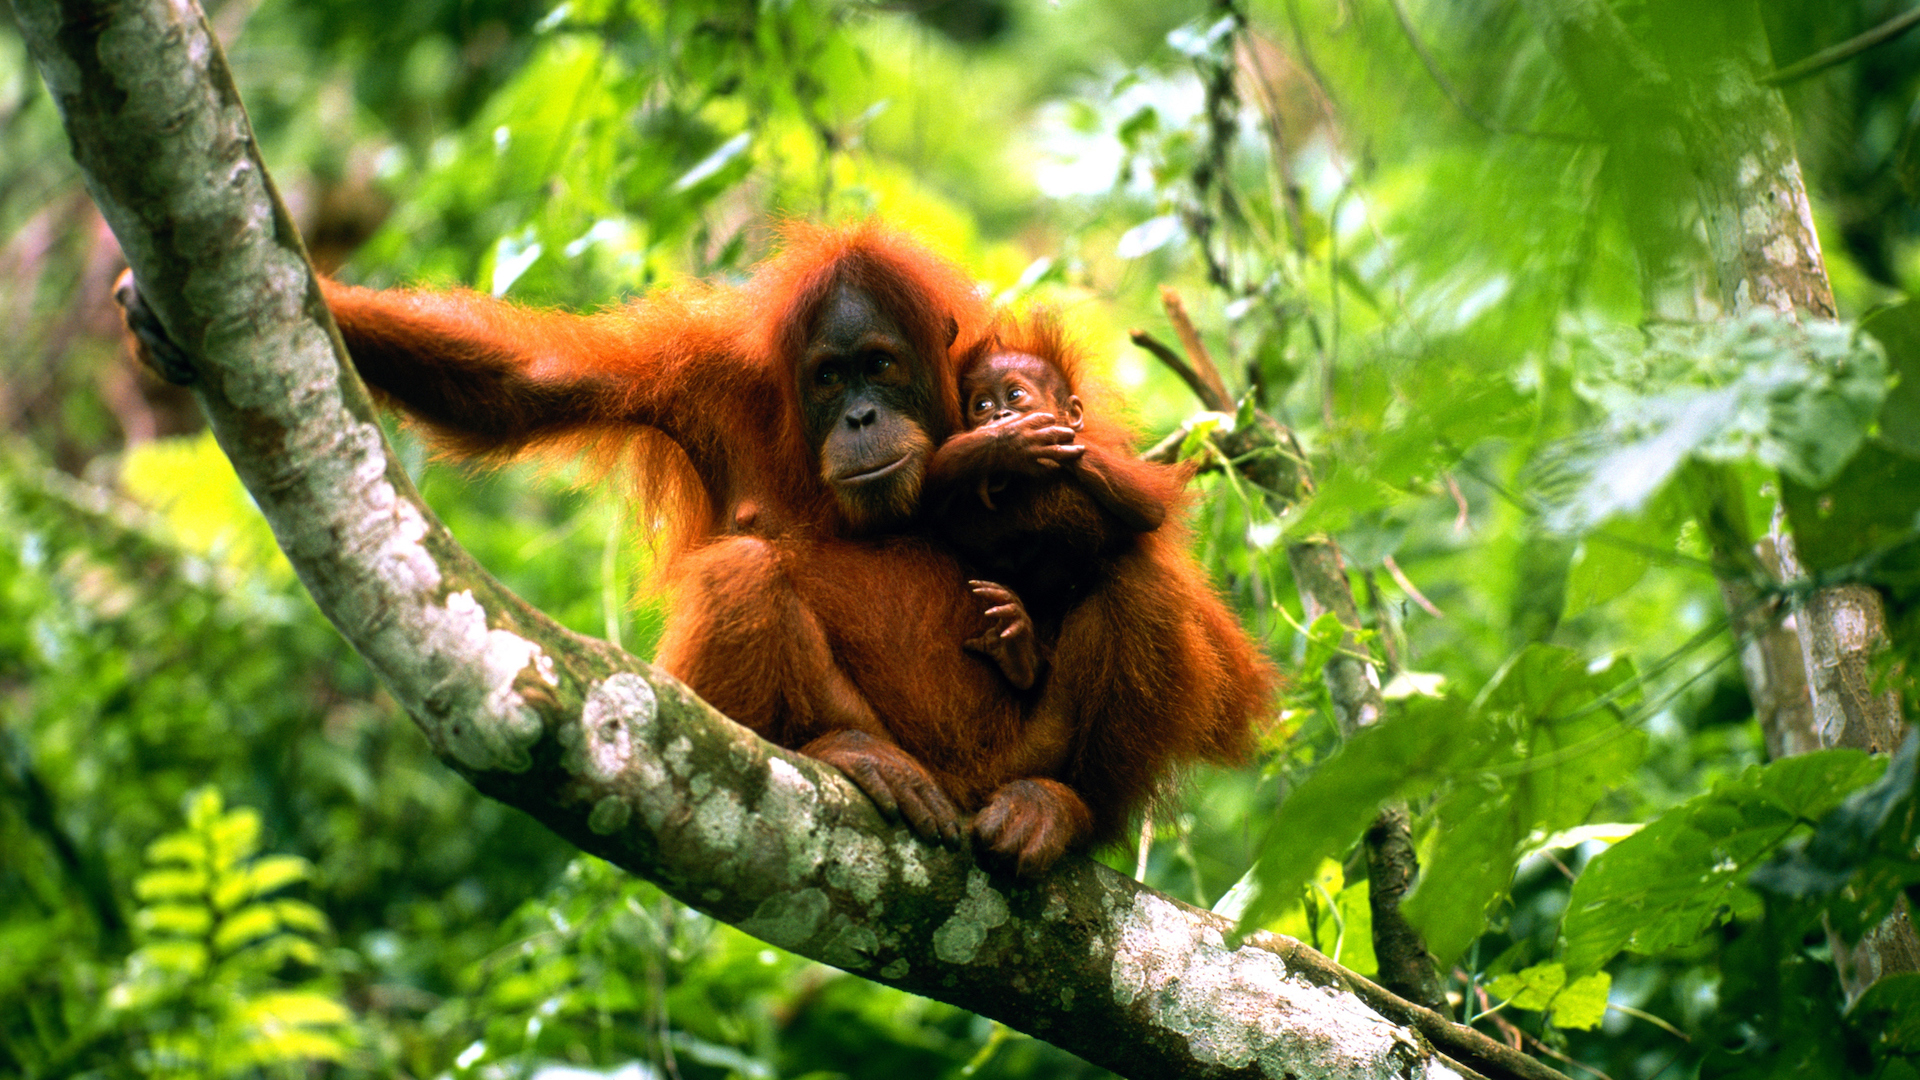 A photograph of an orangutan holding its baby on a branch